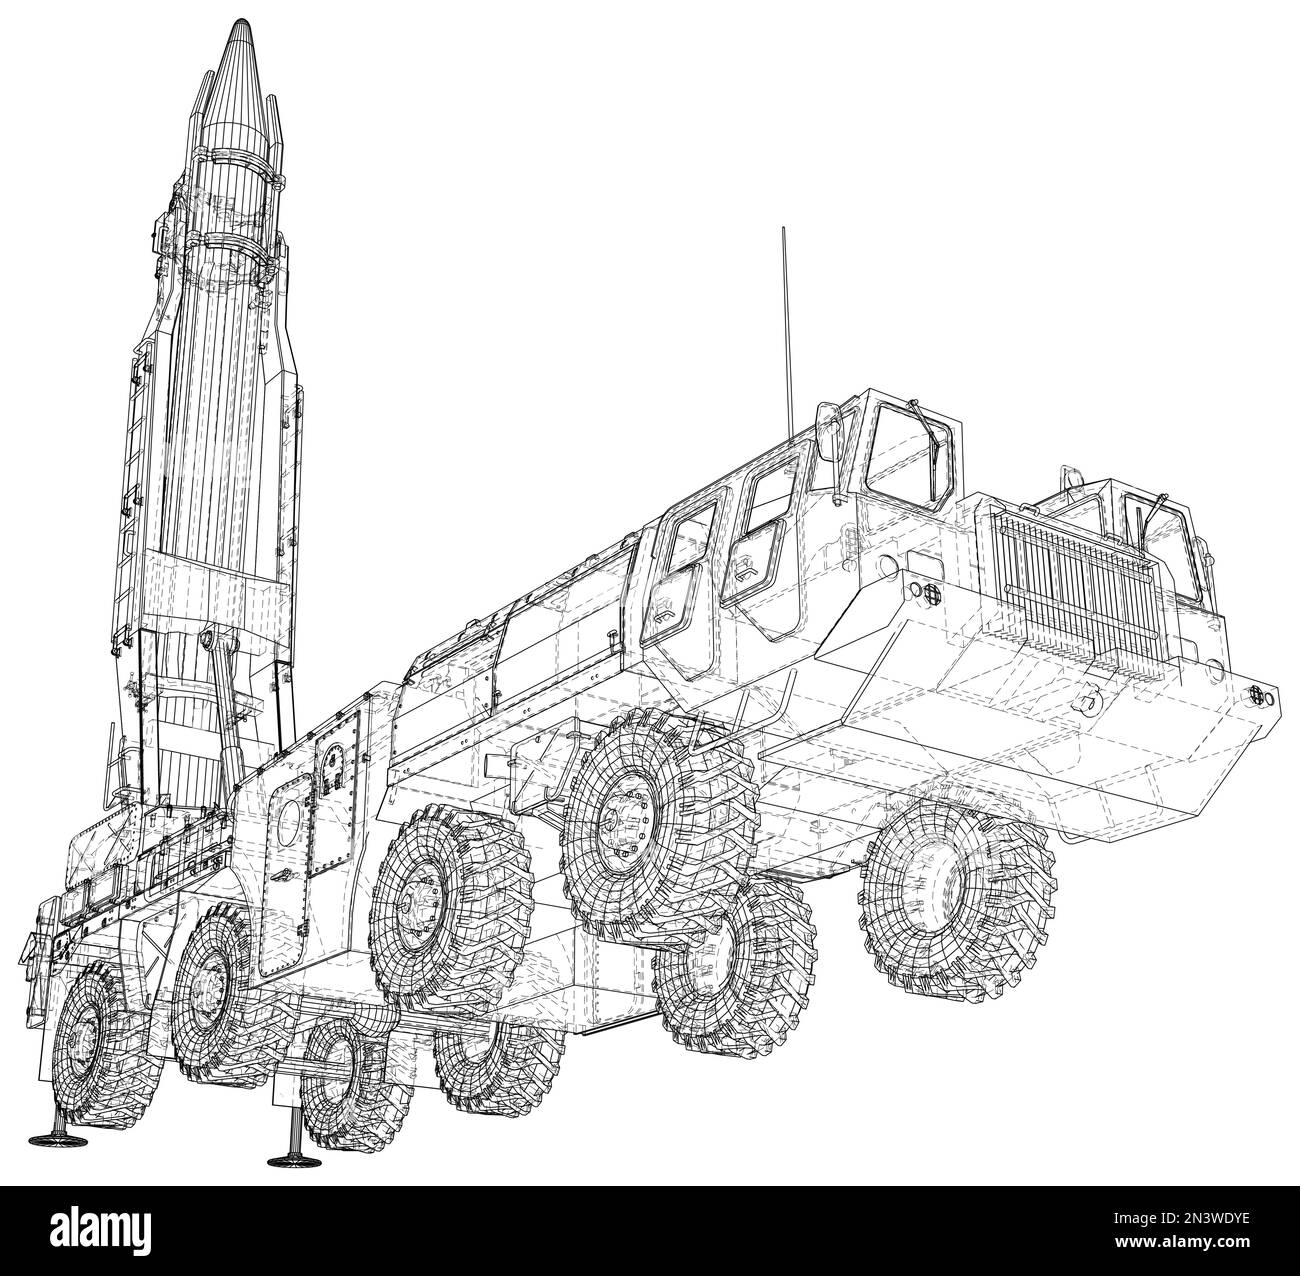 Medium Range Ballistic Missile. Incendiary, thermobaric, strategic nuclear weapon. Vector created of 3d Stock Vector